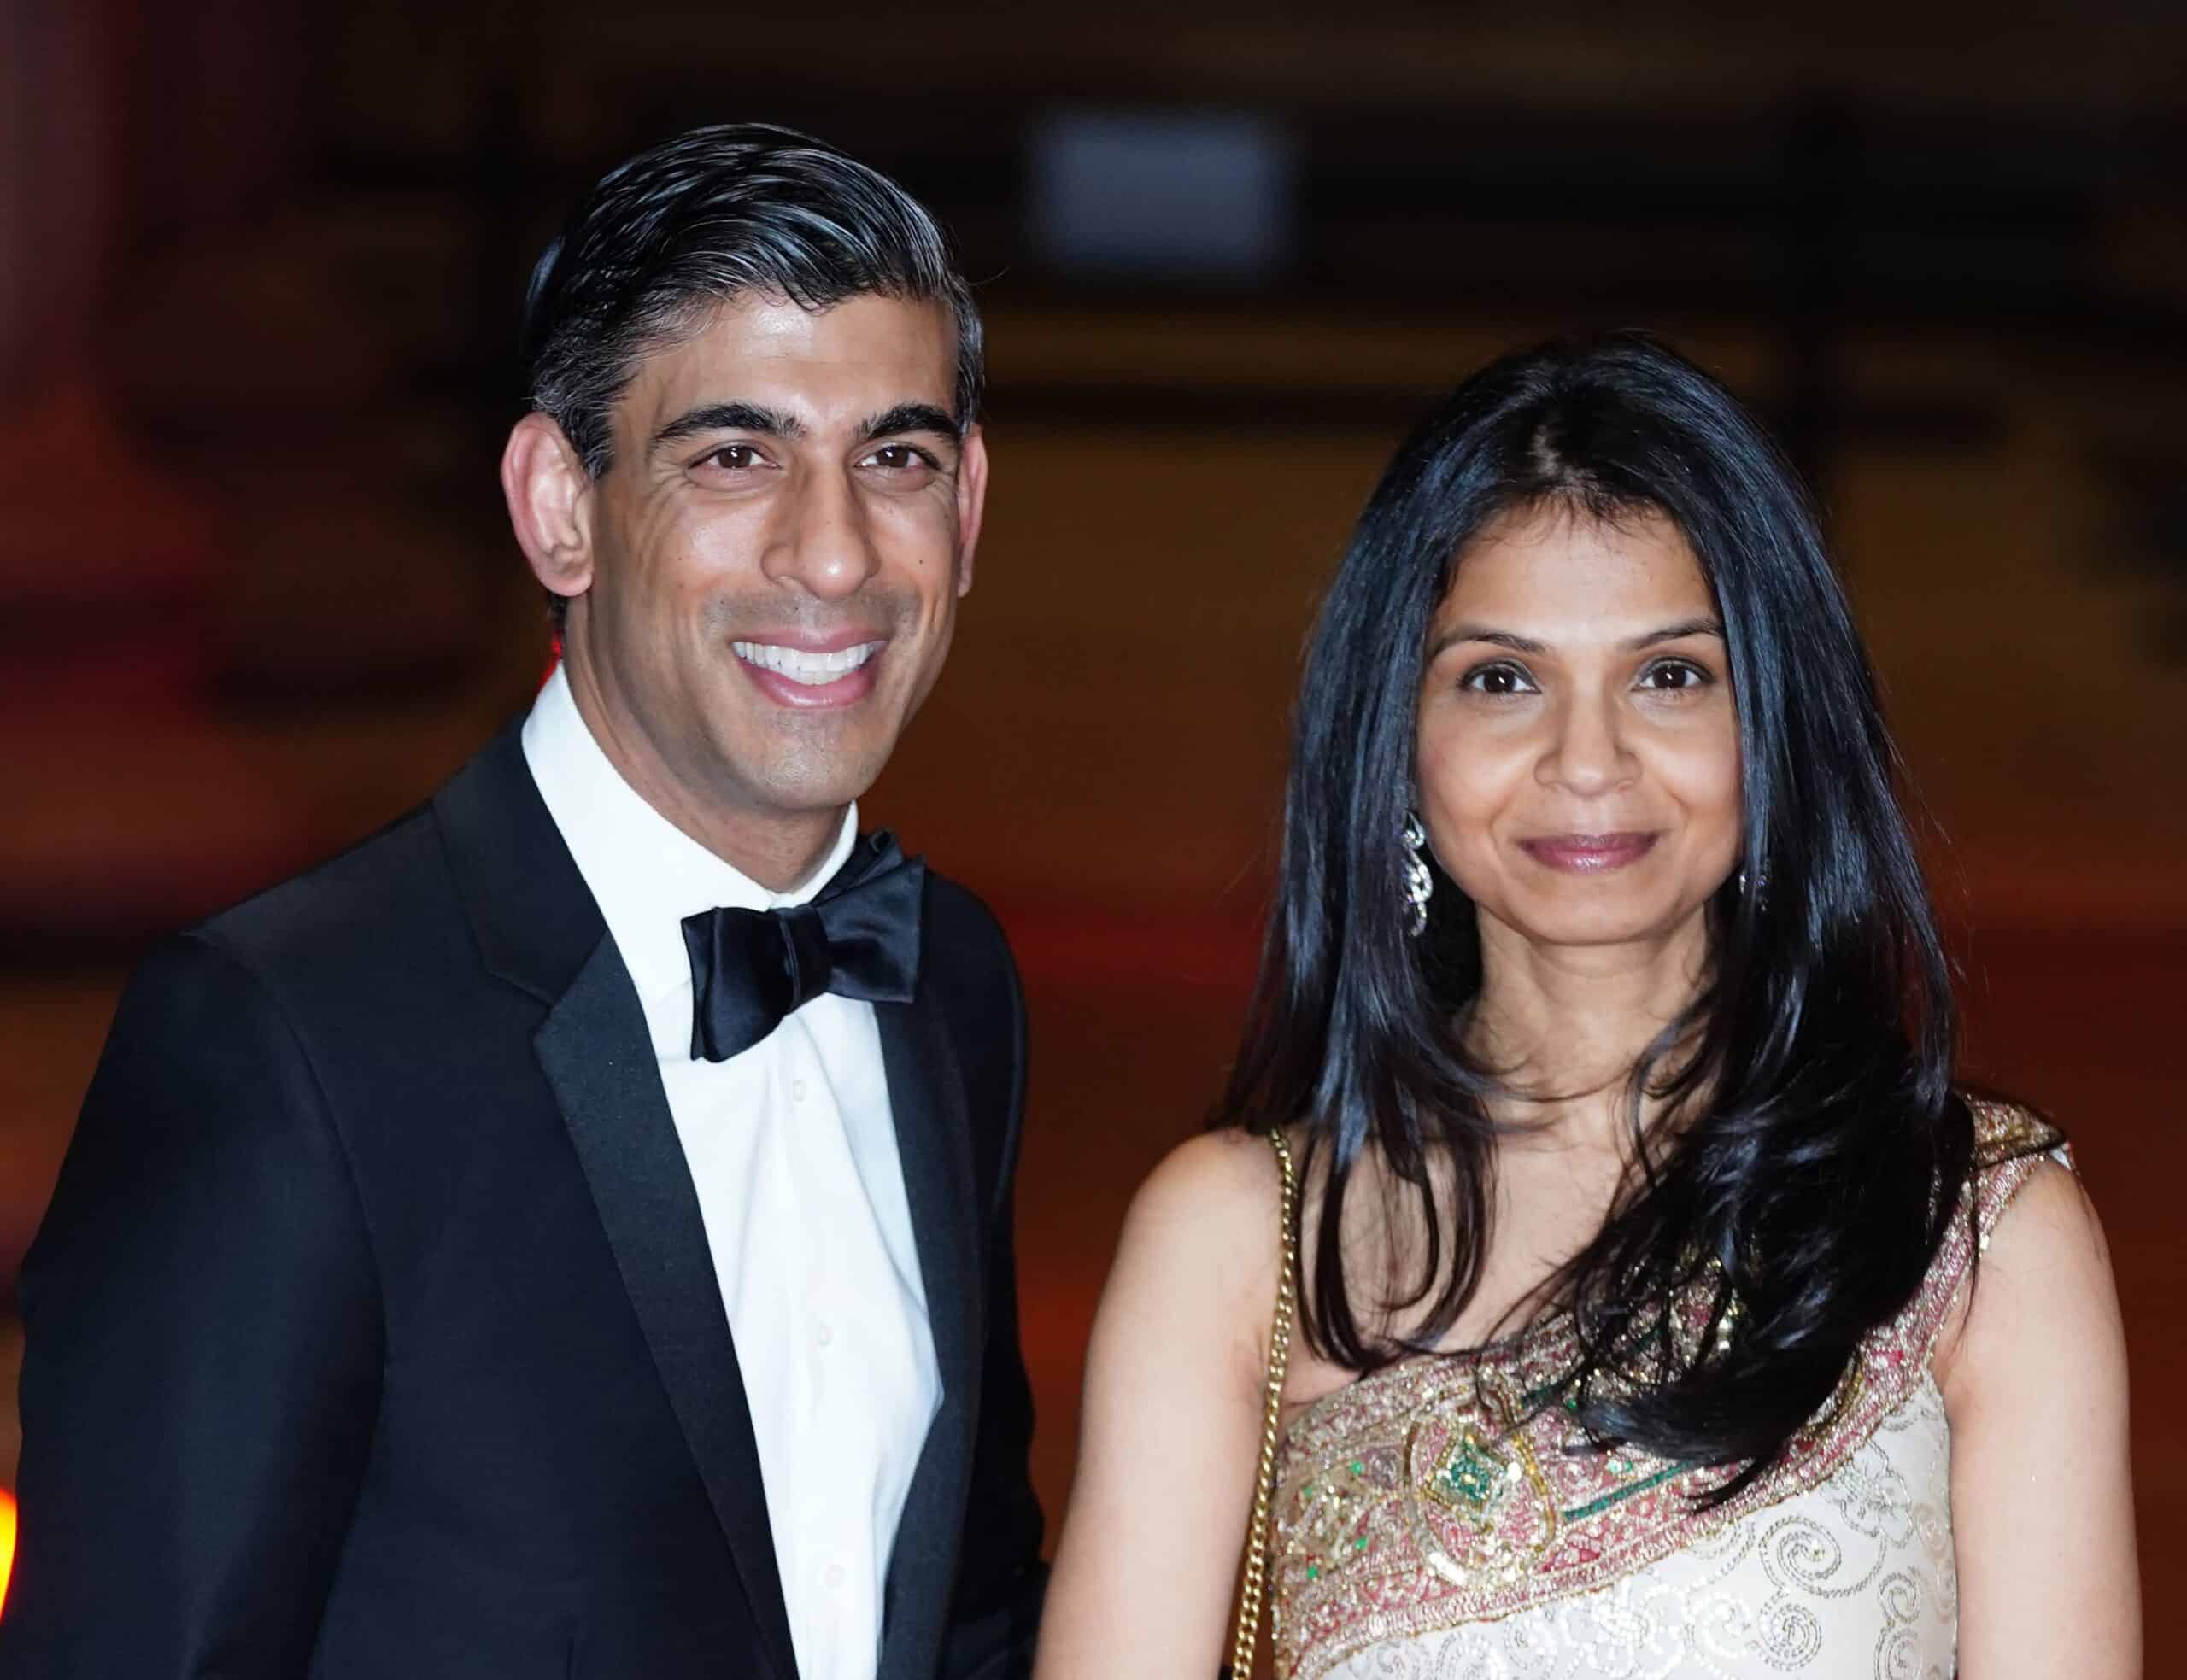 Bad day at the office? Sunak’s wife loses £49 million in one day